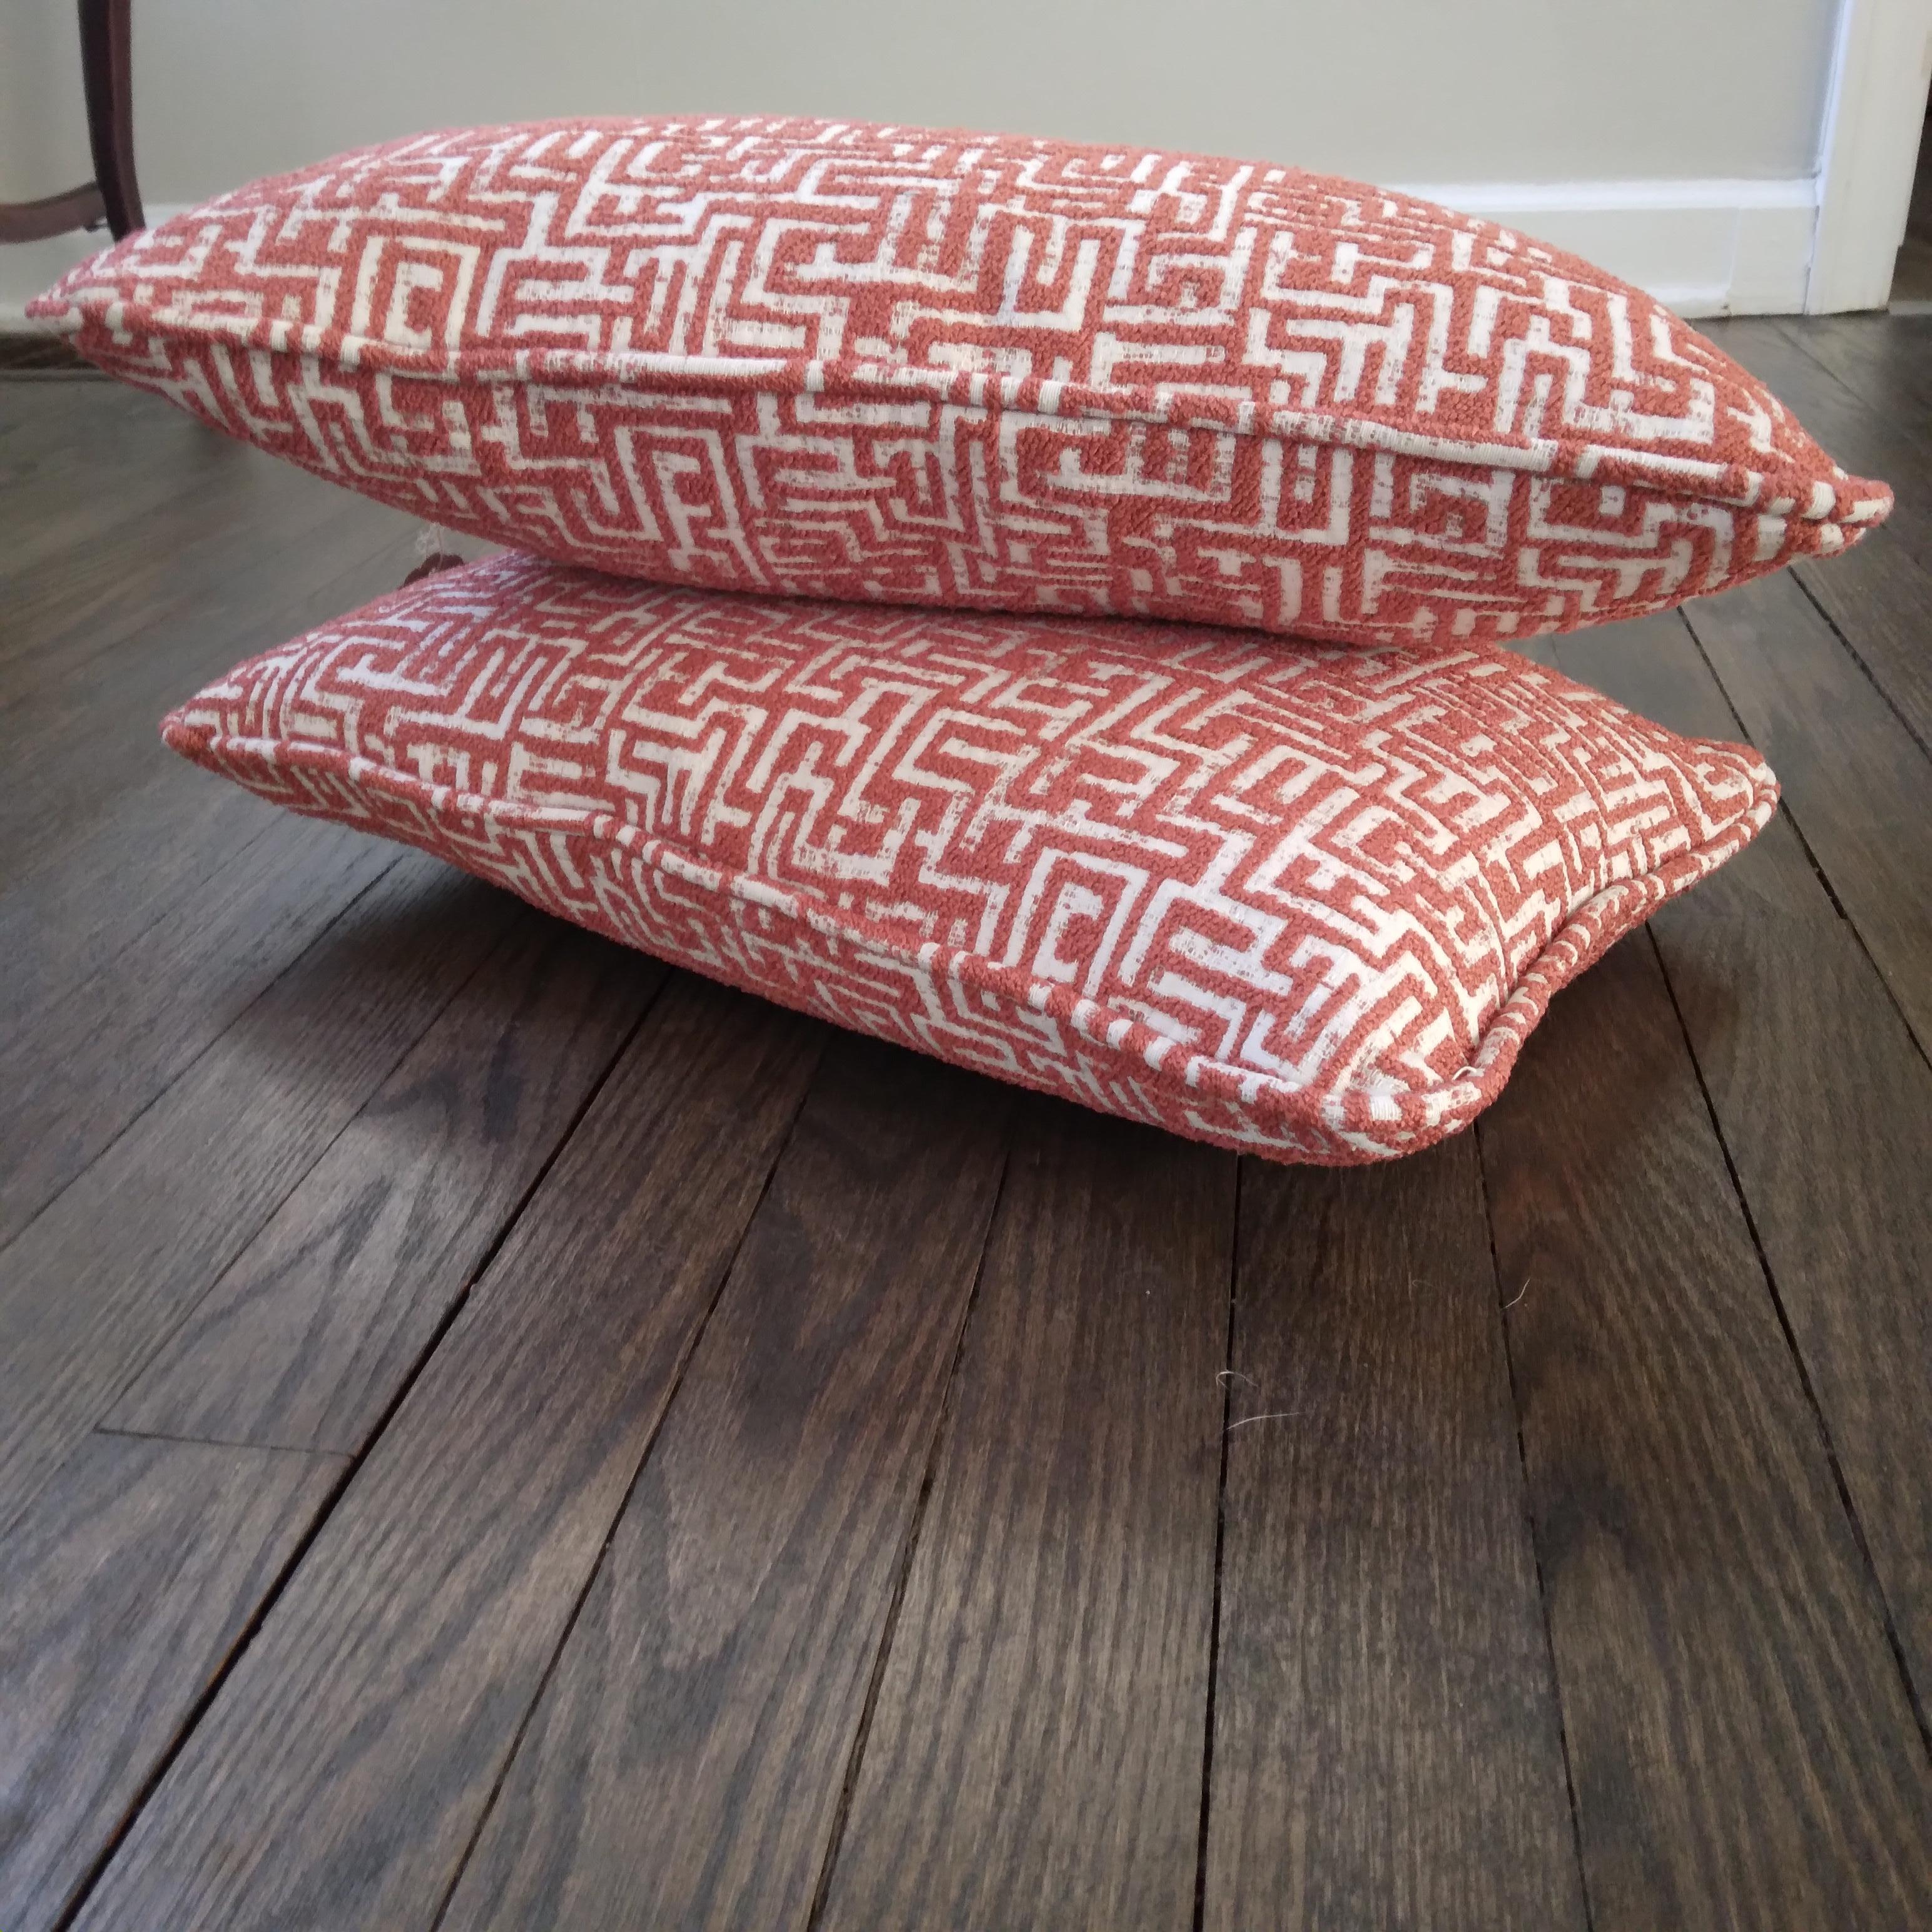 Kuba-inspired Geometric Jacquard Accent Pillows in Orange and White - a pair  For Sale 1